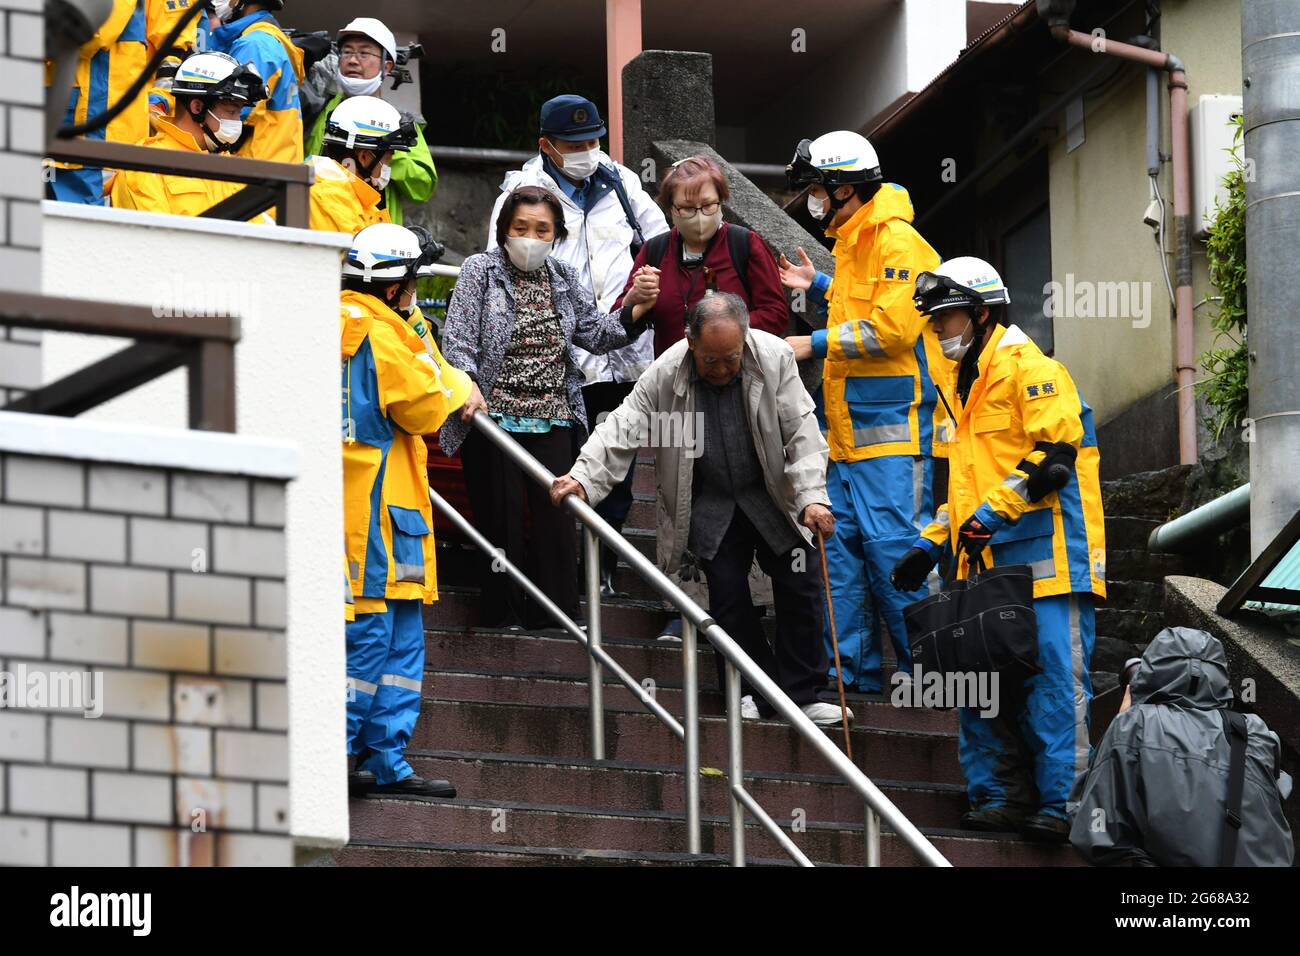 Shizuoka, Japan. 4th July, 2021. Rescuers help to transfer local citizens after a mudslide in Atami, Shizuoka prefecture, Japan, July 4, 2021. Two people were dead and about 20 others remained missing on Saturday following a massive mudslide triggered by torrential rain in central Japan, local authorities said. Credit: Hua Yi/Xinhua/Alamy Live News Stock Photo